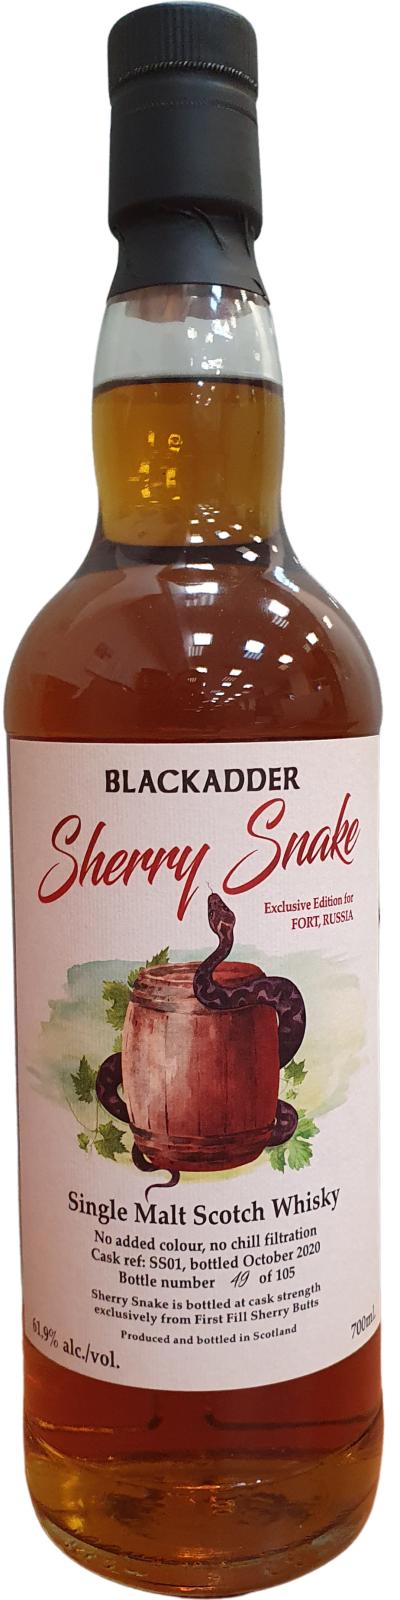 Single Malt Scotch Whisky Sherry Snake BA Exclusive Edition for Fort Russia 61.9% 700ml